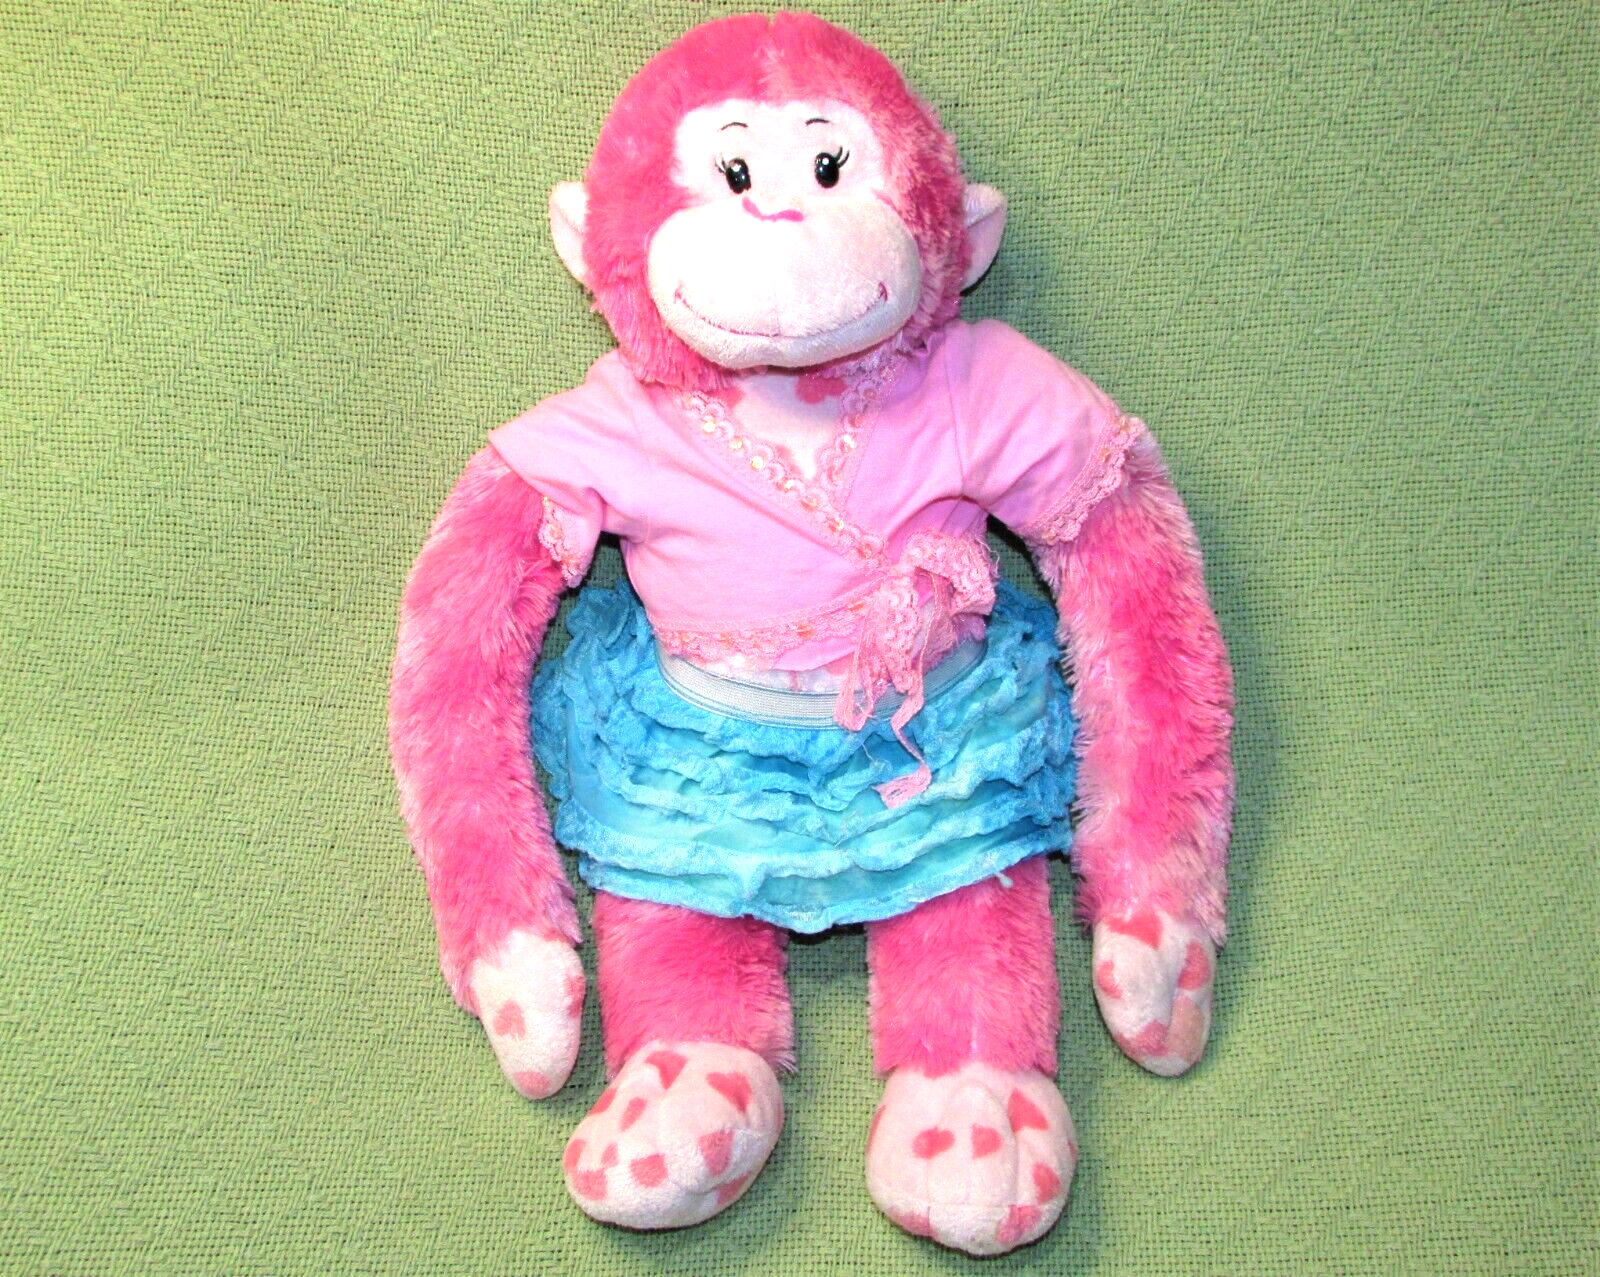 Primary image for 18" BUILD A BEAR MONKEY PINK HEART HANGING CHIMP PLUSH W/BLUE SKIRT PINK SHIRT